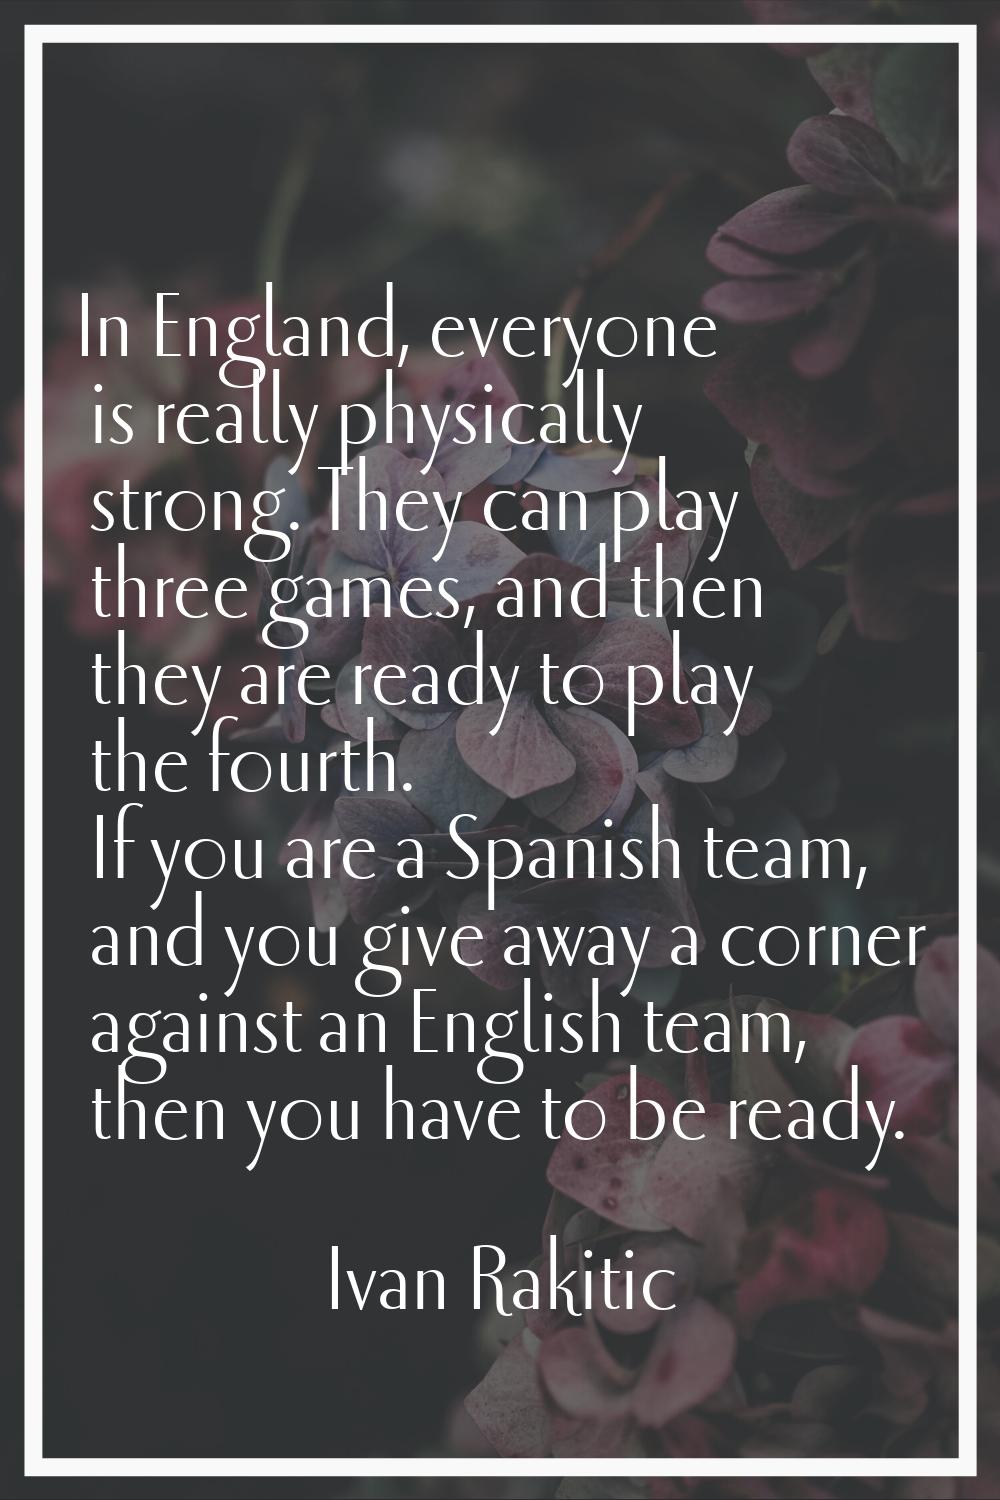 In England, everyone is really physically strong. They can play three games, and then they are read